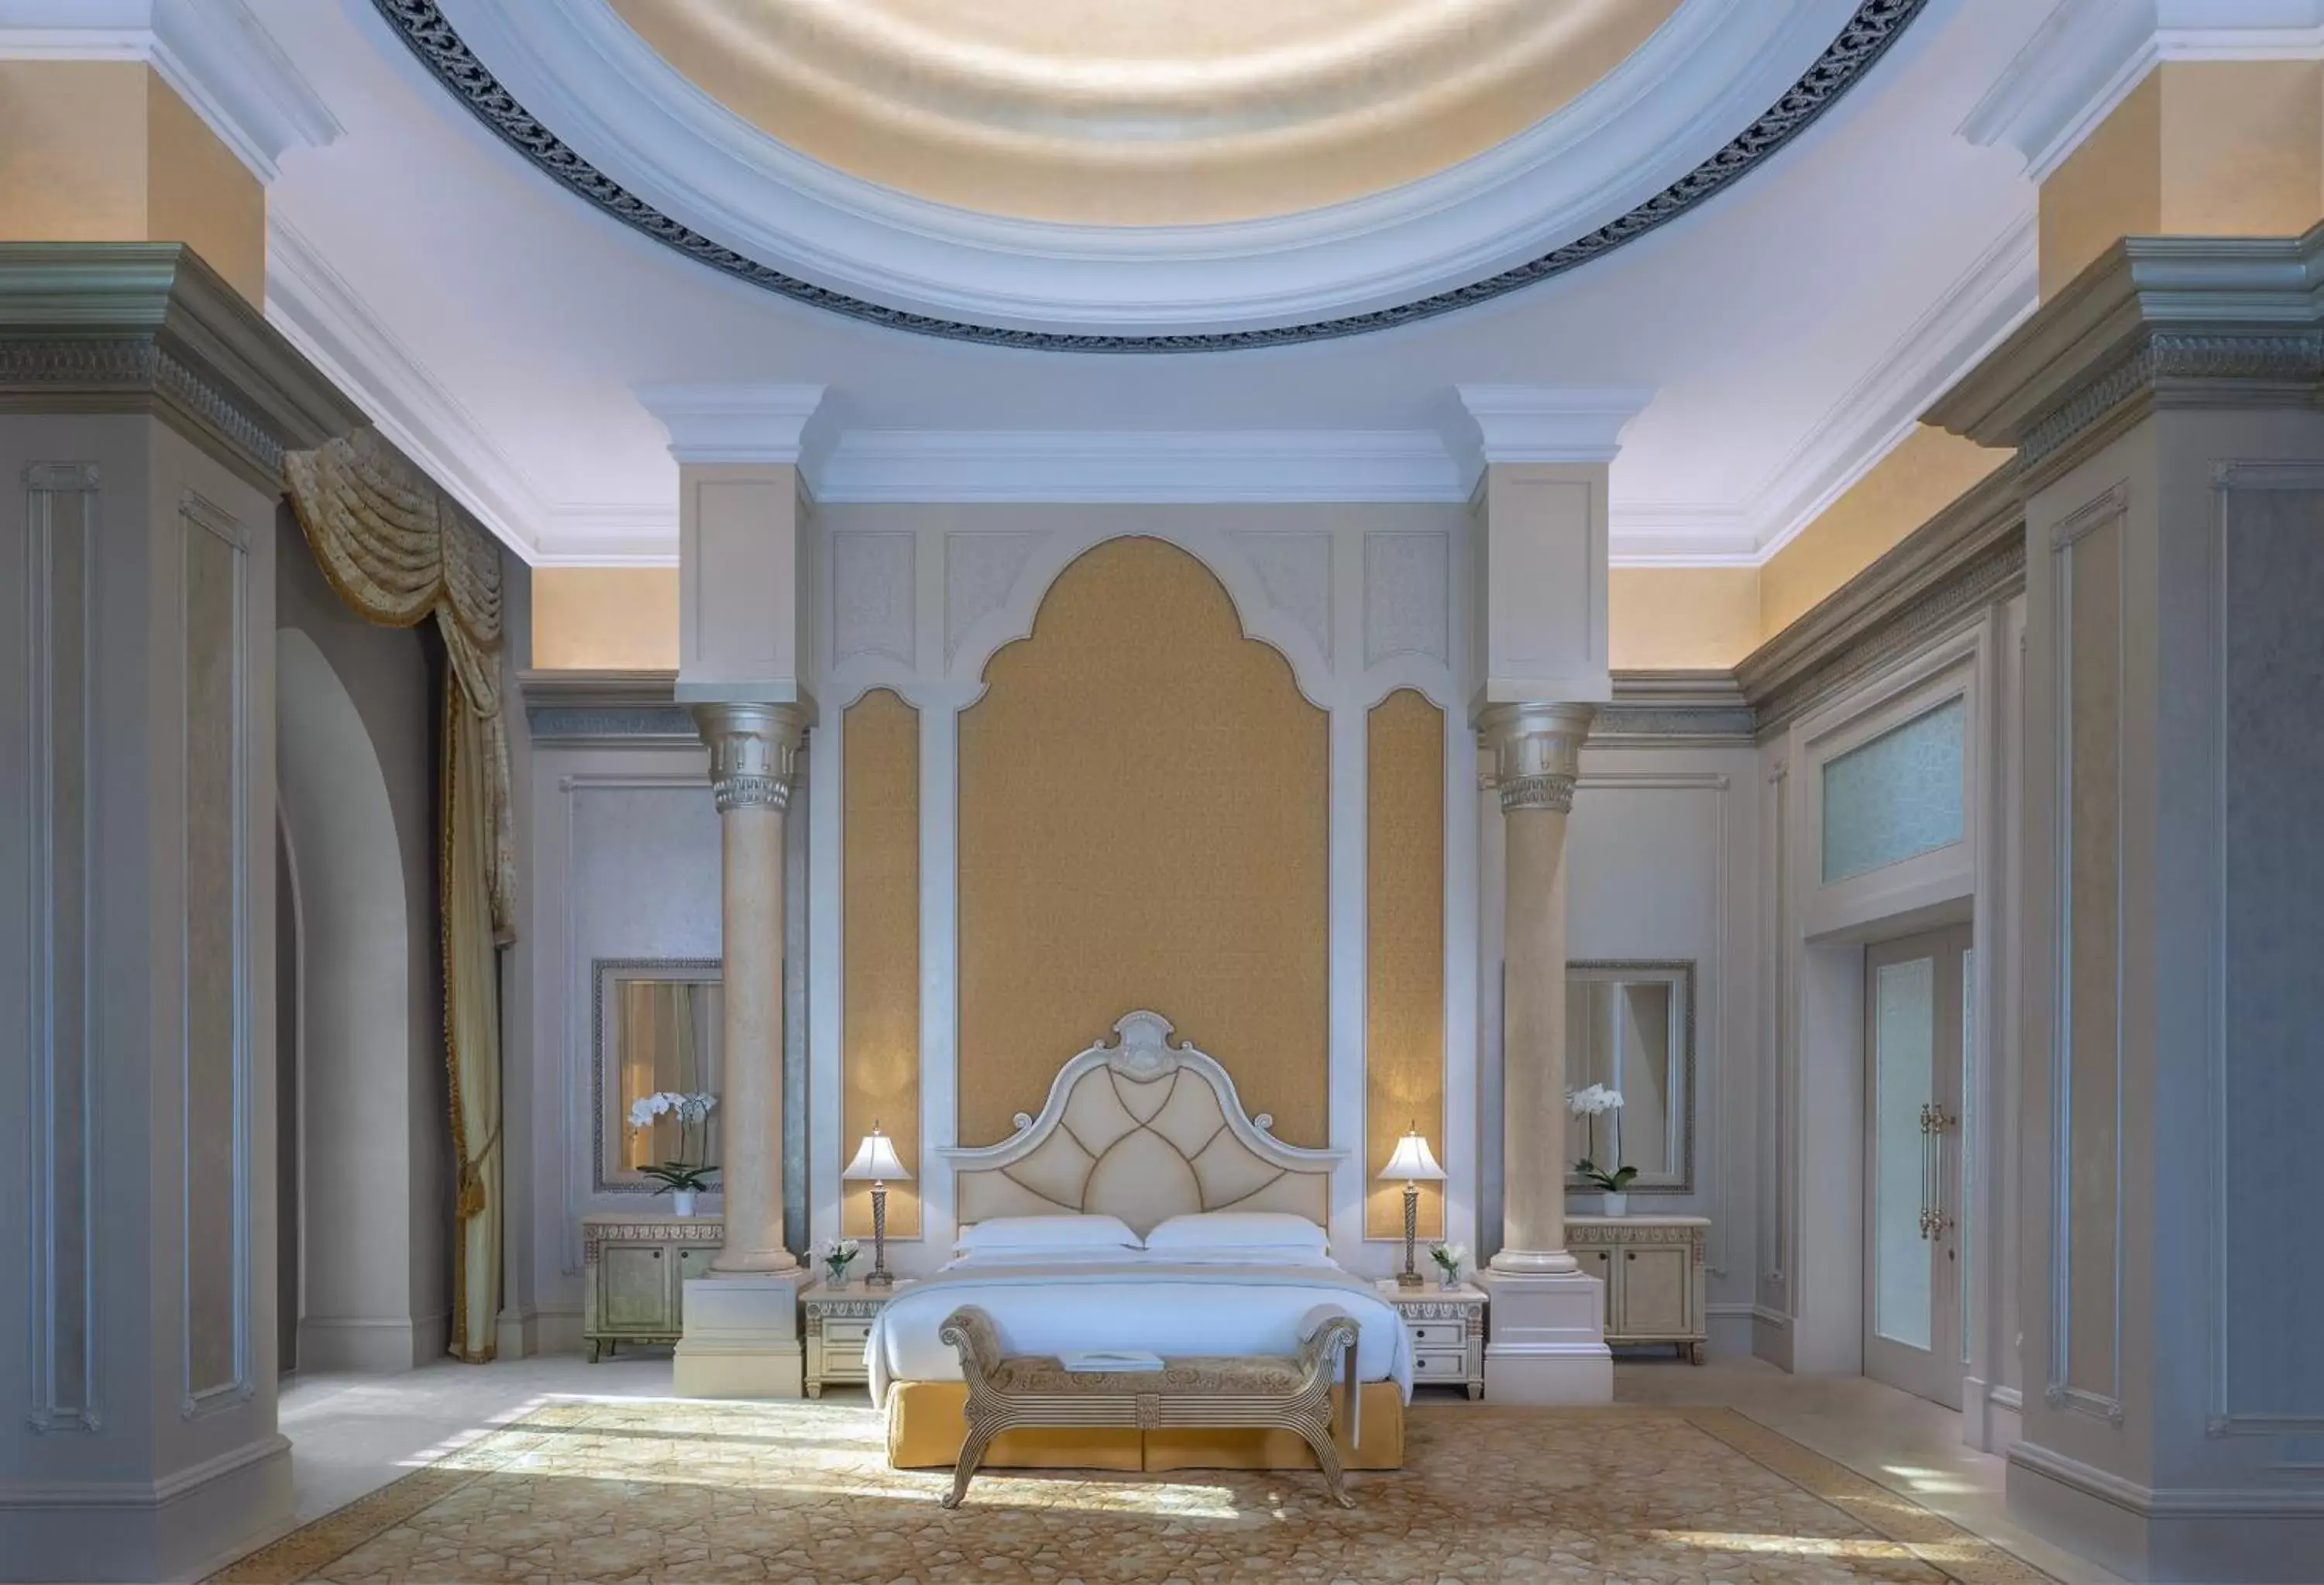 Two Bedroom Palace Suite, Balcony with 24 hours Beachfront Club Lounge Access, including Daily Breakfast, Afternoon Tea, Evening Drinks & Canapes and Exclusive Beach Area in Emirates Palace Mandarin Oriental, Abu Dhabi